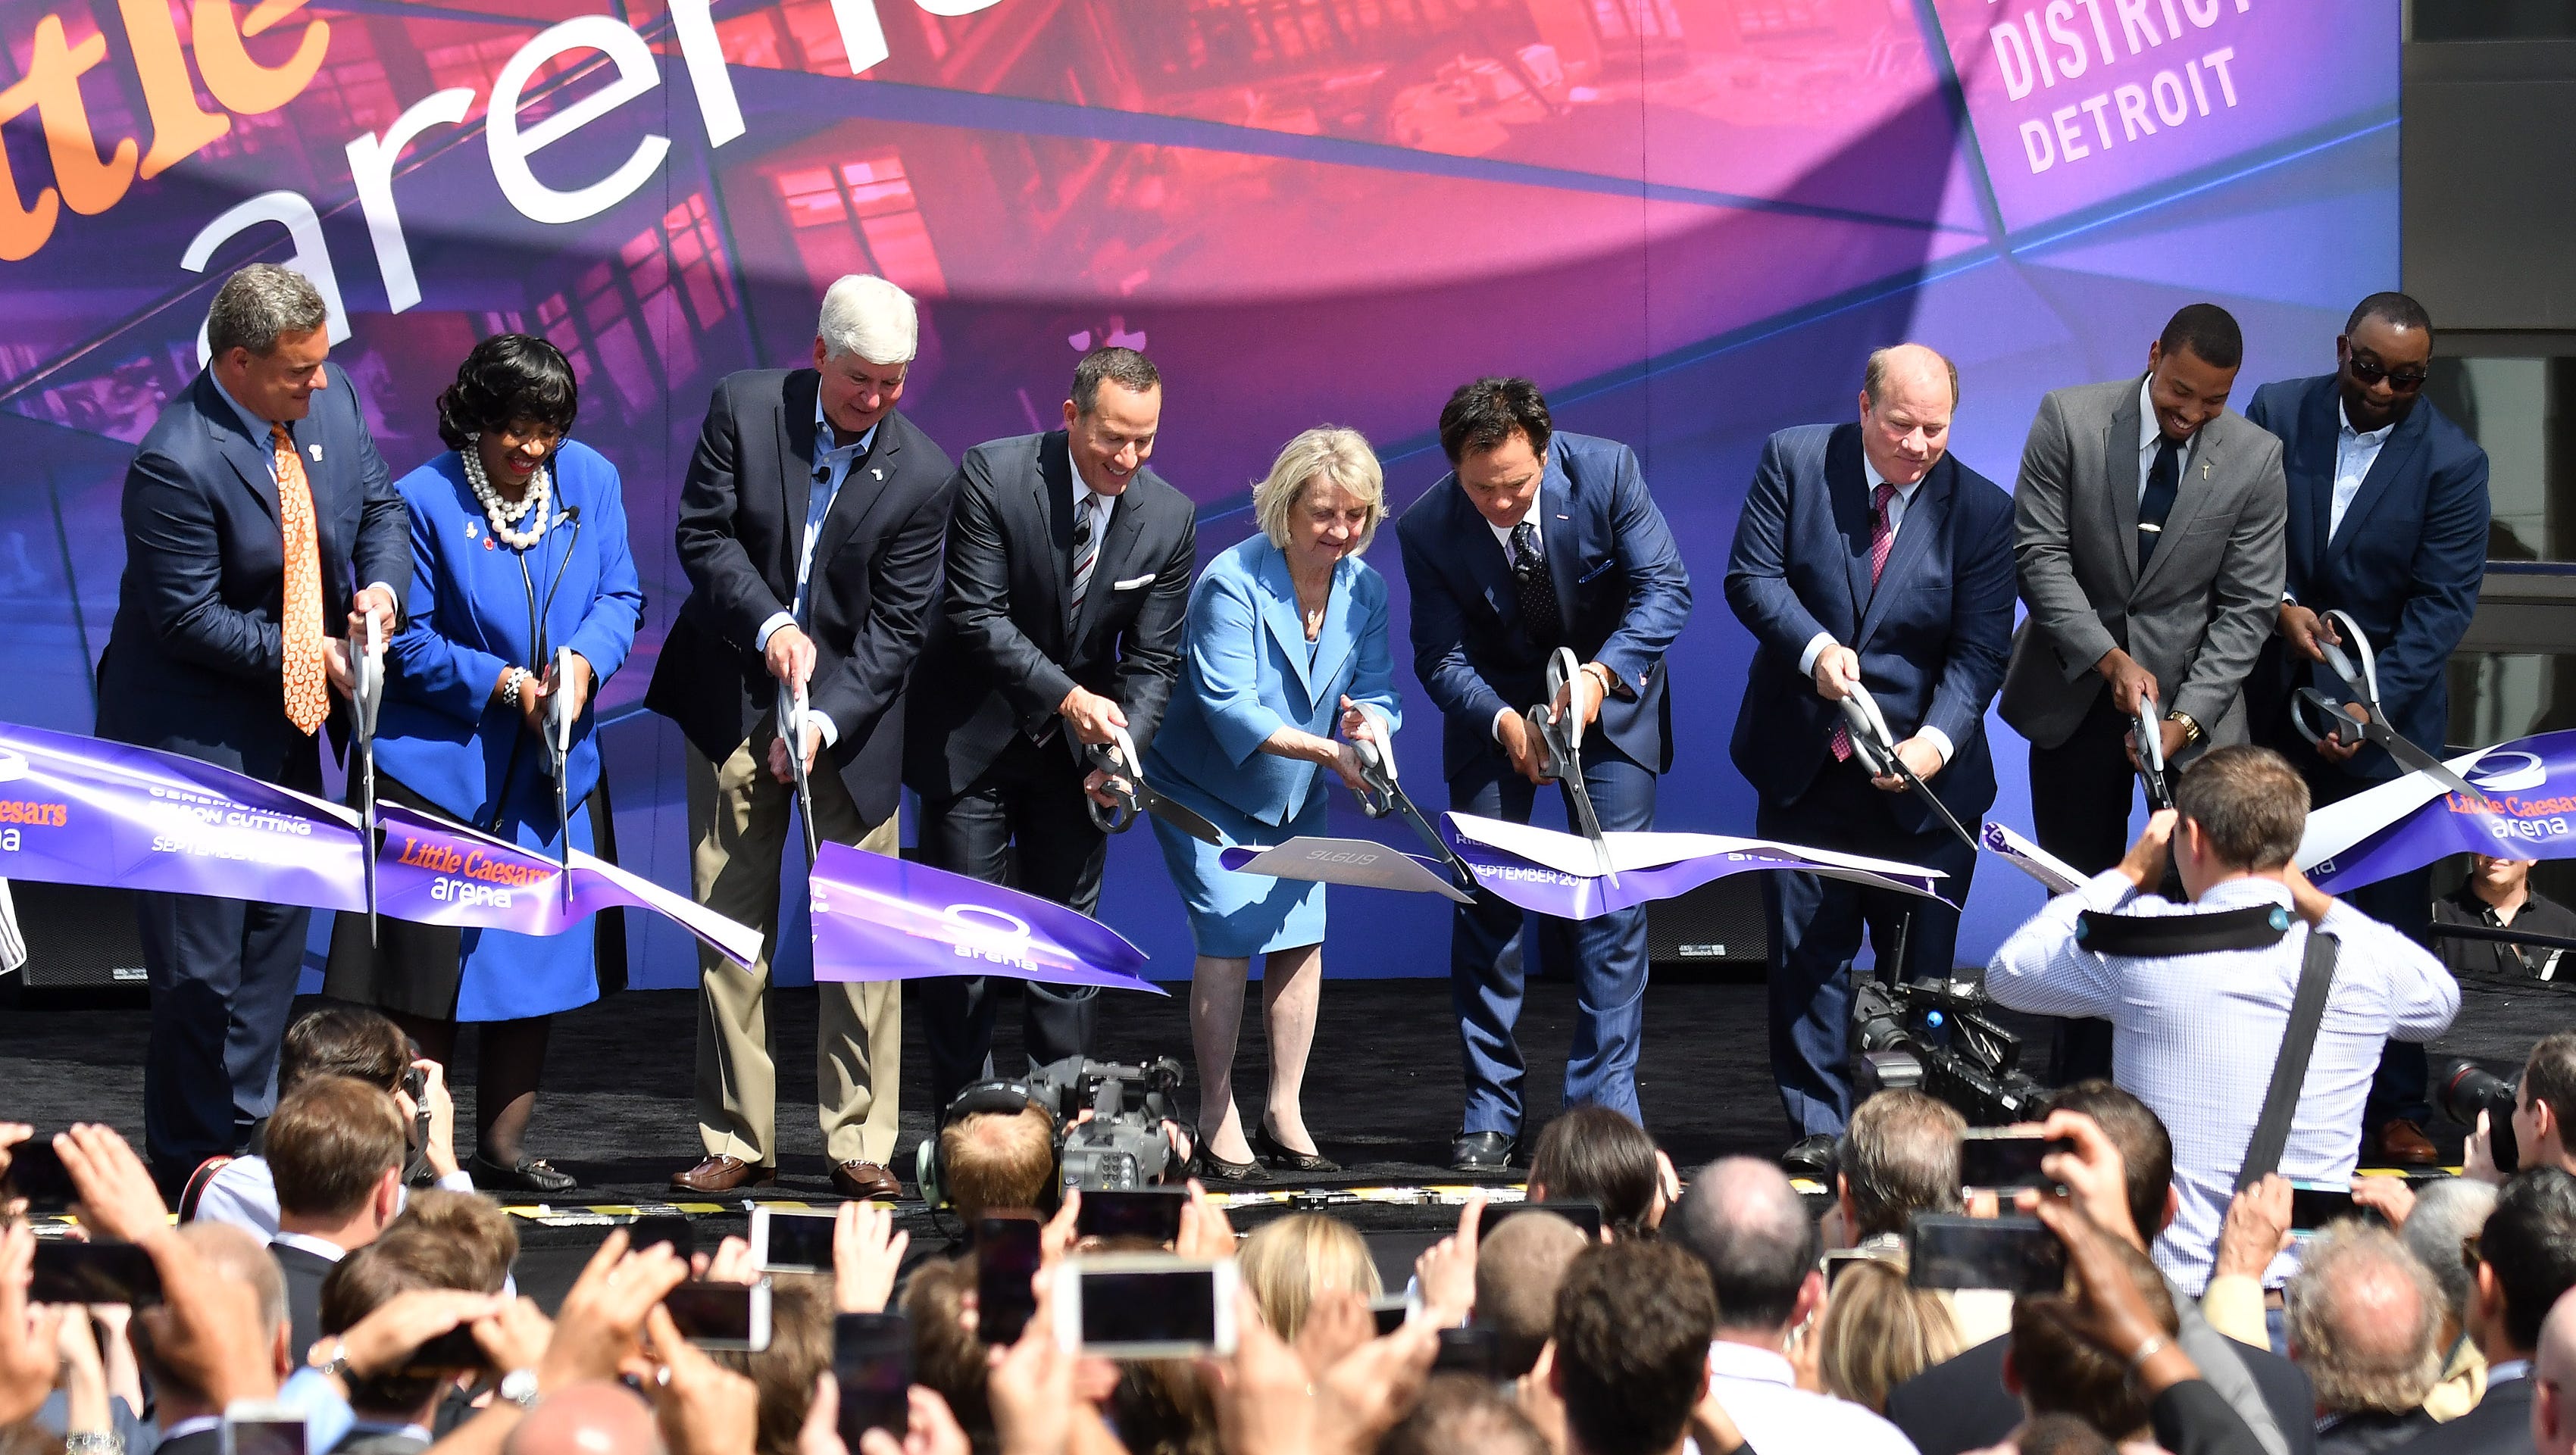 Business and political leaders cut the ribbon on the new Little Caesars Arena on Sept. 5, 2017.